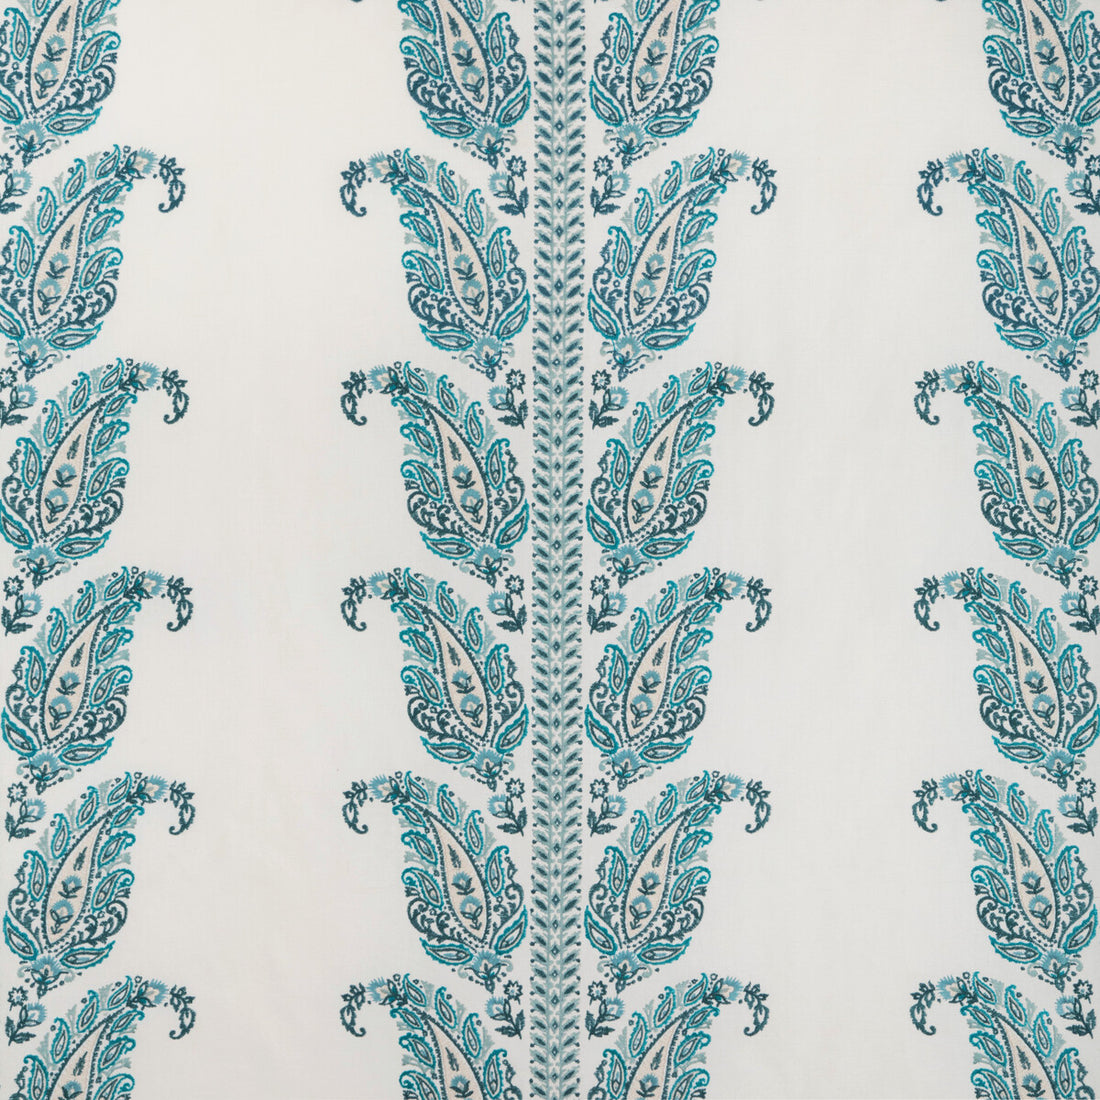 Yara Paisley Emb fabric in lagoon color - pattern 8023112.1313.0 - by Brunschwig &amp; Fils in the Anduze Embroideries collection